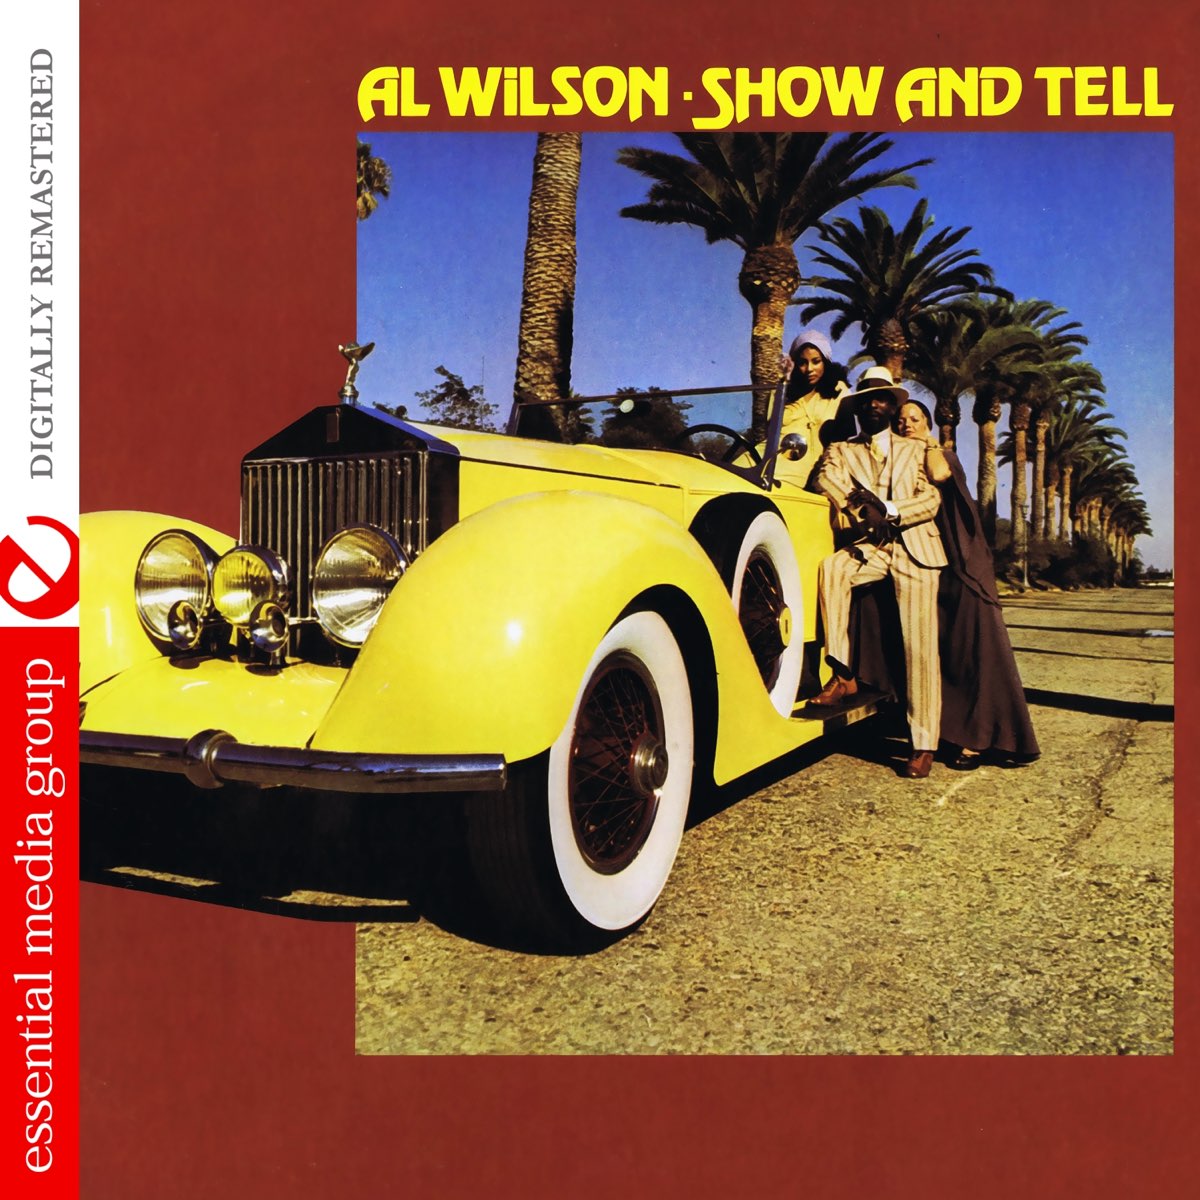 Show and Tell (Remastered) by Al Wilson on Apple Music